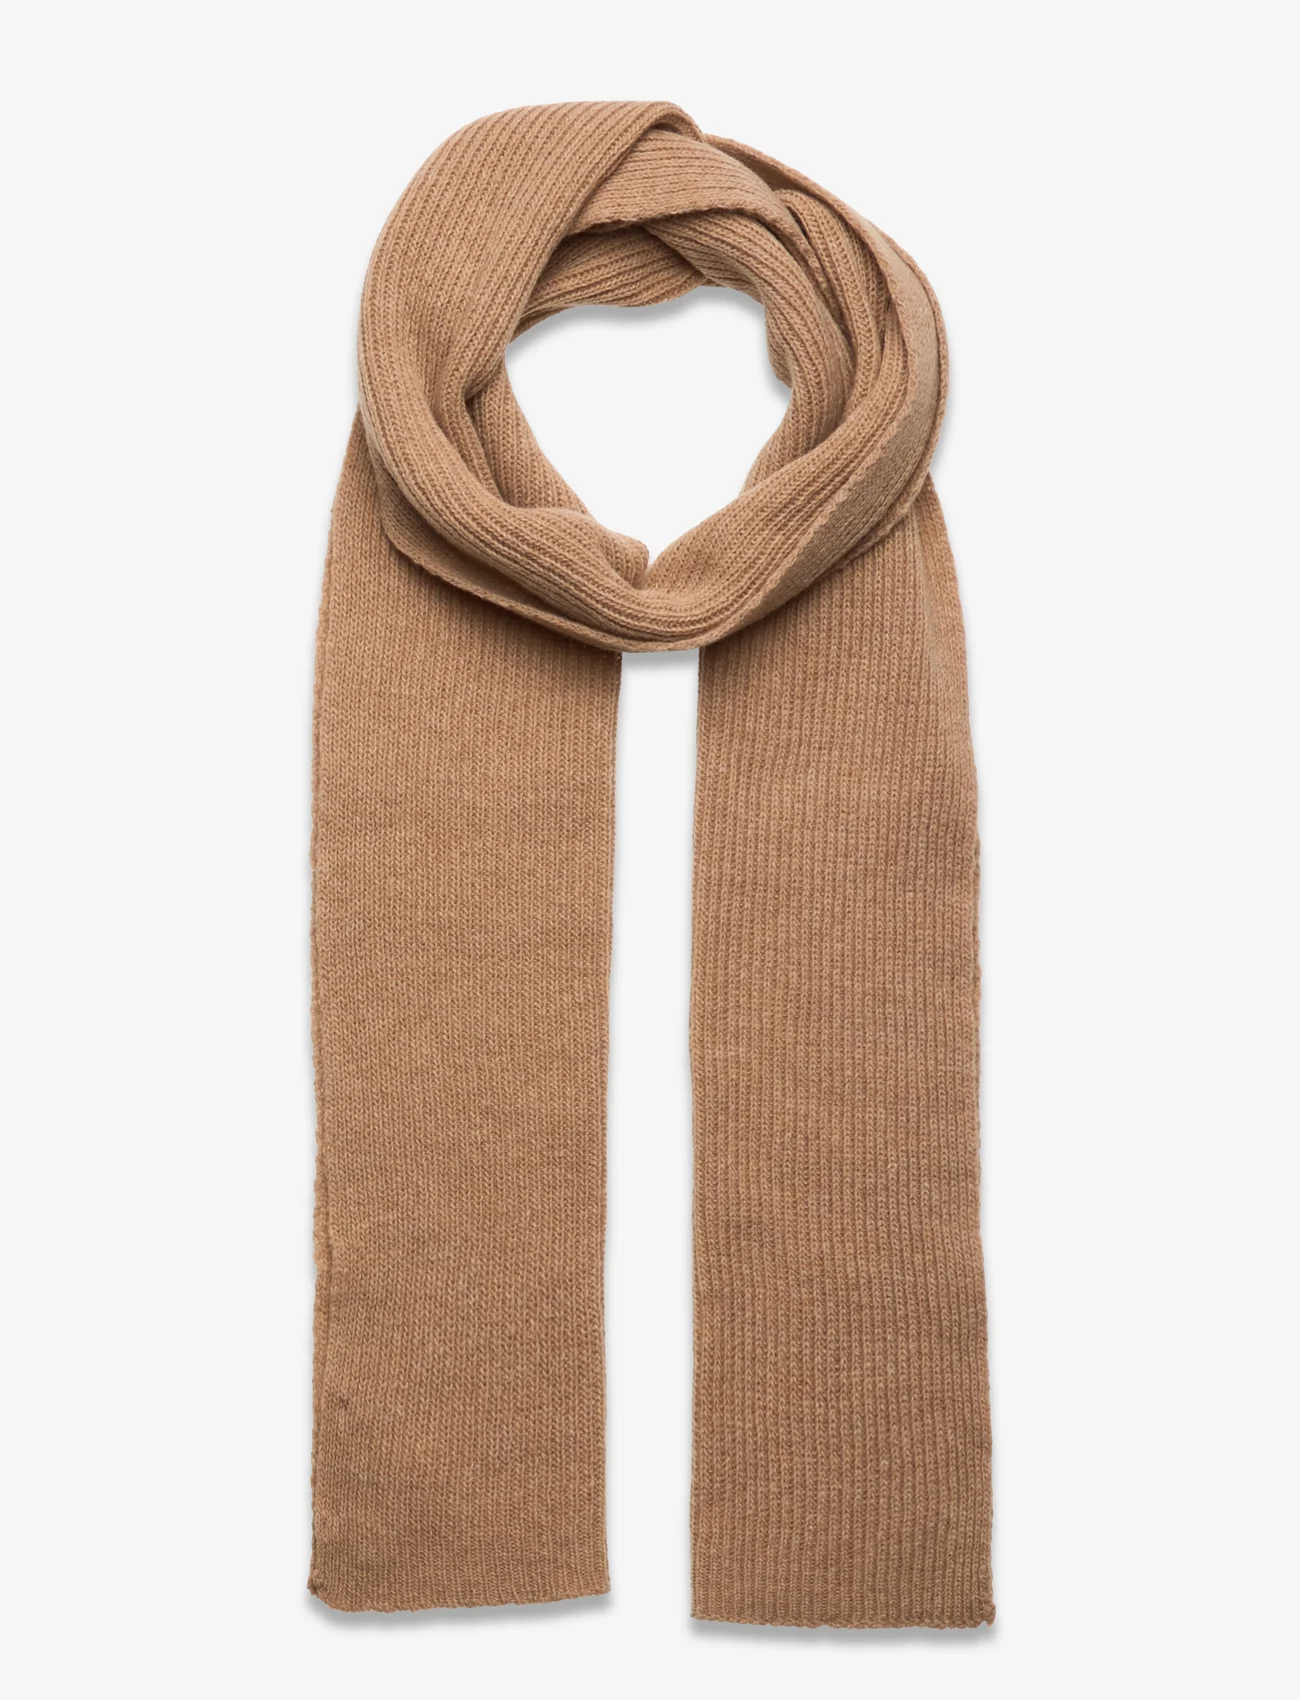 Garment Project - GP Unisex Wool Scarf - Taupe - winter scarves - taupe - 0